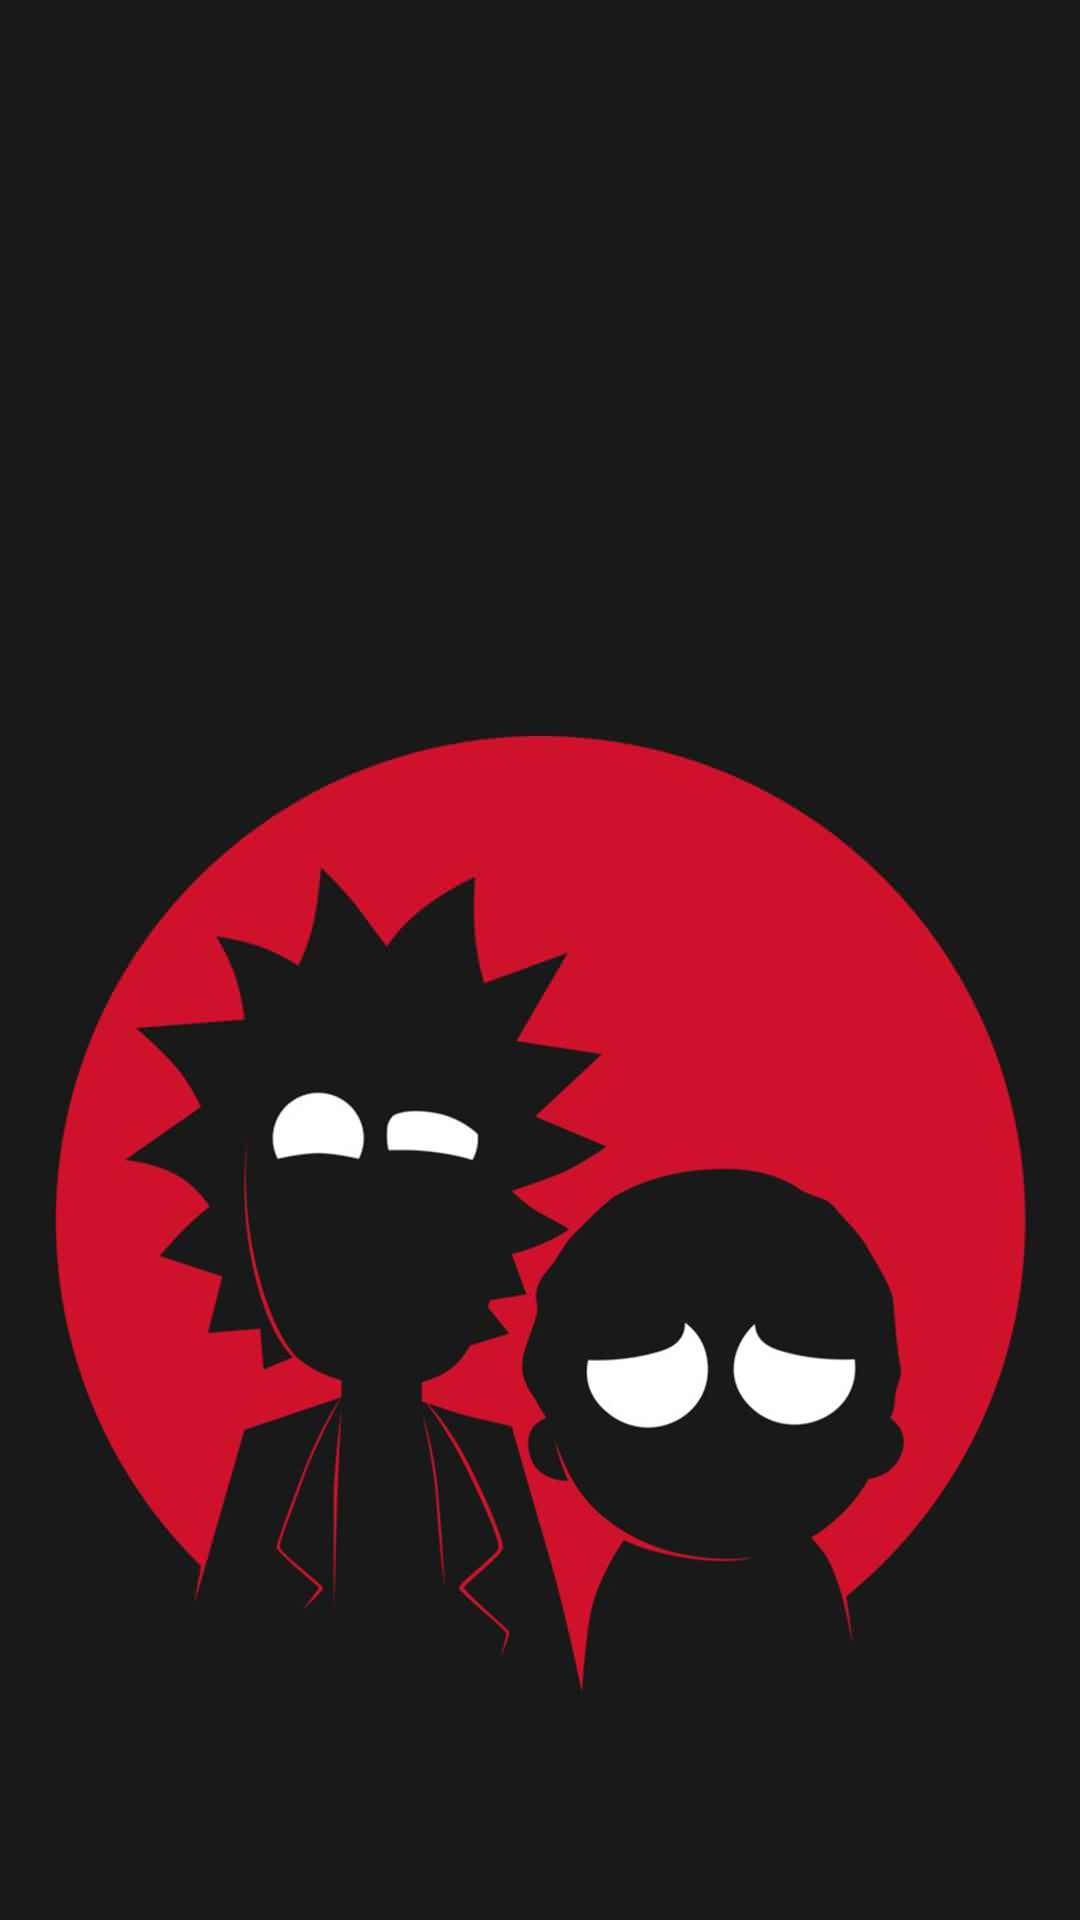 Red Circle Rick And Morty Iphone Wallpaper